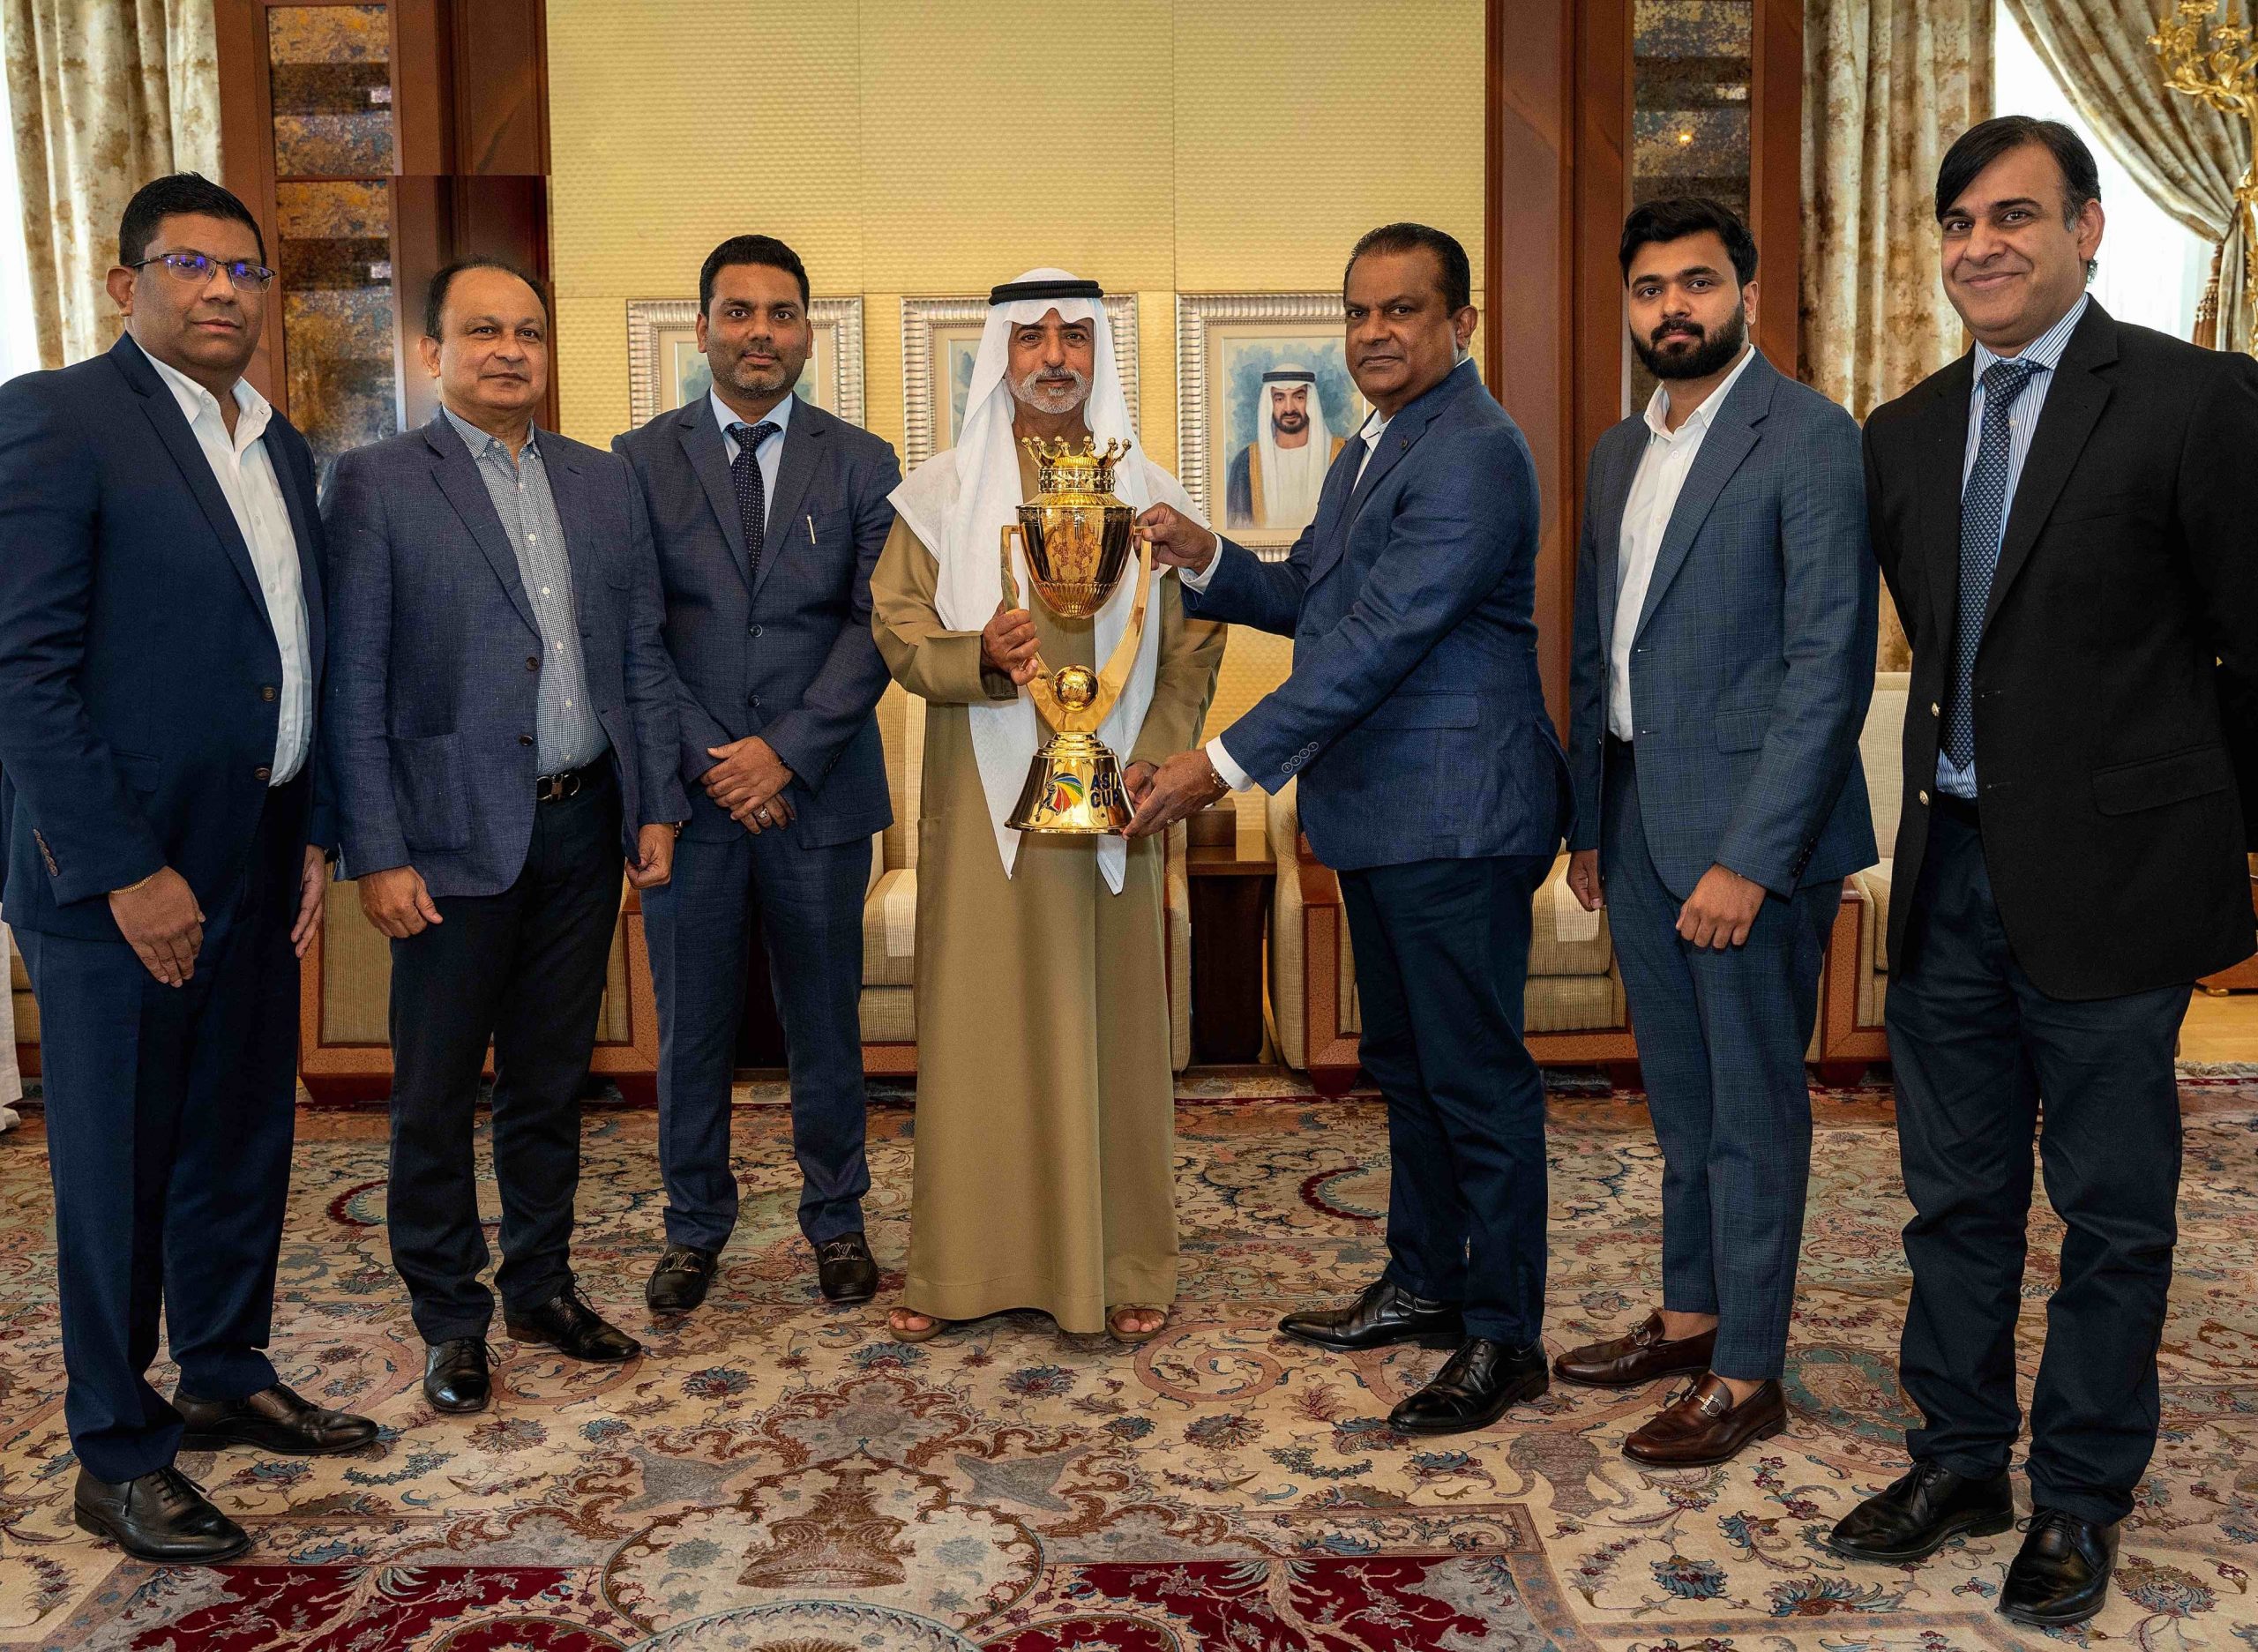 UAE minister unveils Asia Cup 2022 trophy in Abu Dhabi